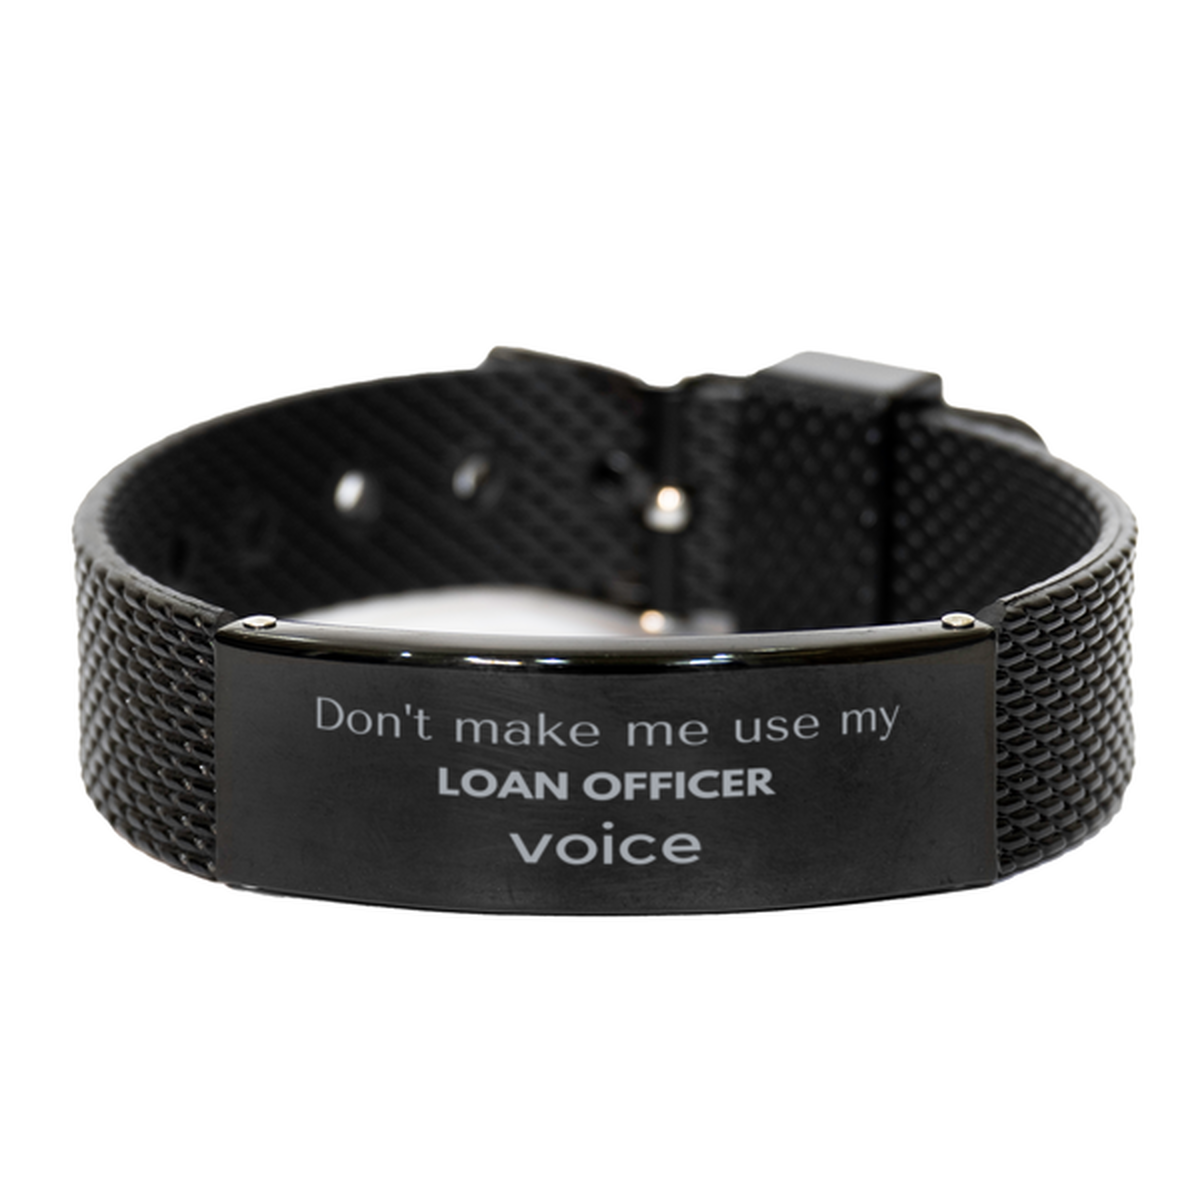 Don't make me use my Loan Officer voice, Sarcasm Loan Officer Gifts, Christmas Loan Officer Black Shark Mesh Bracelet Birthday Unique Gifts For Loan Officer Coworkers, Men, Women, Colleague, Friends